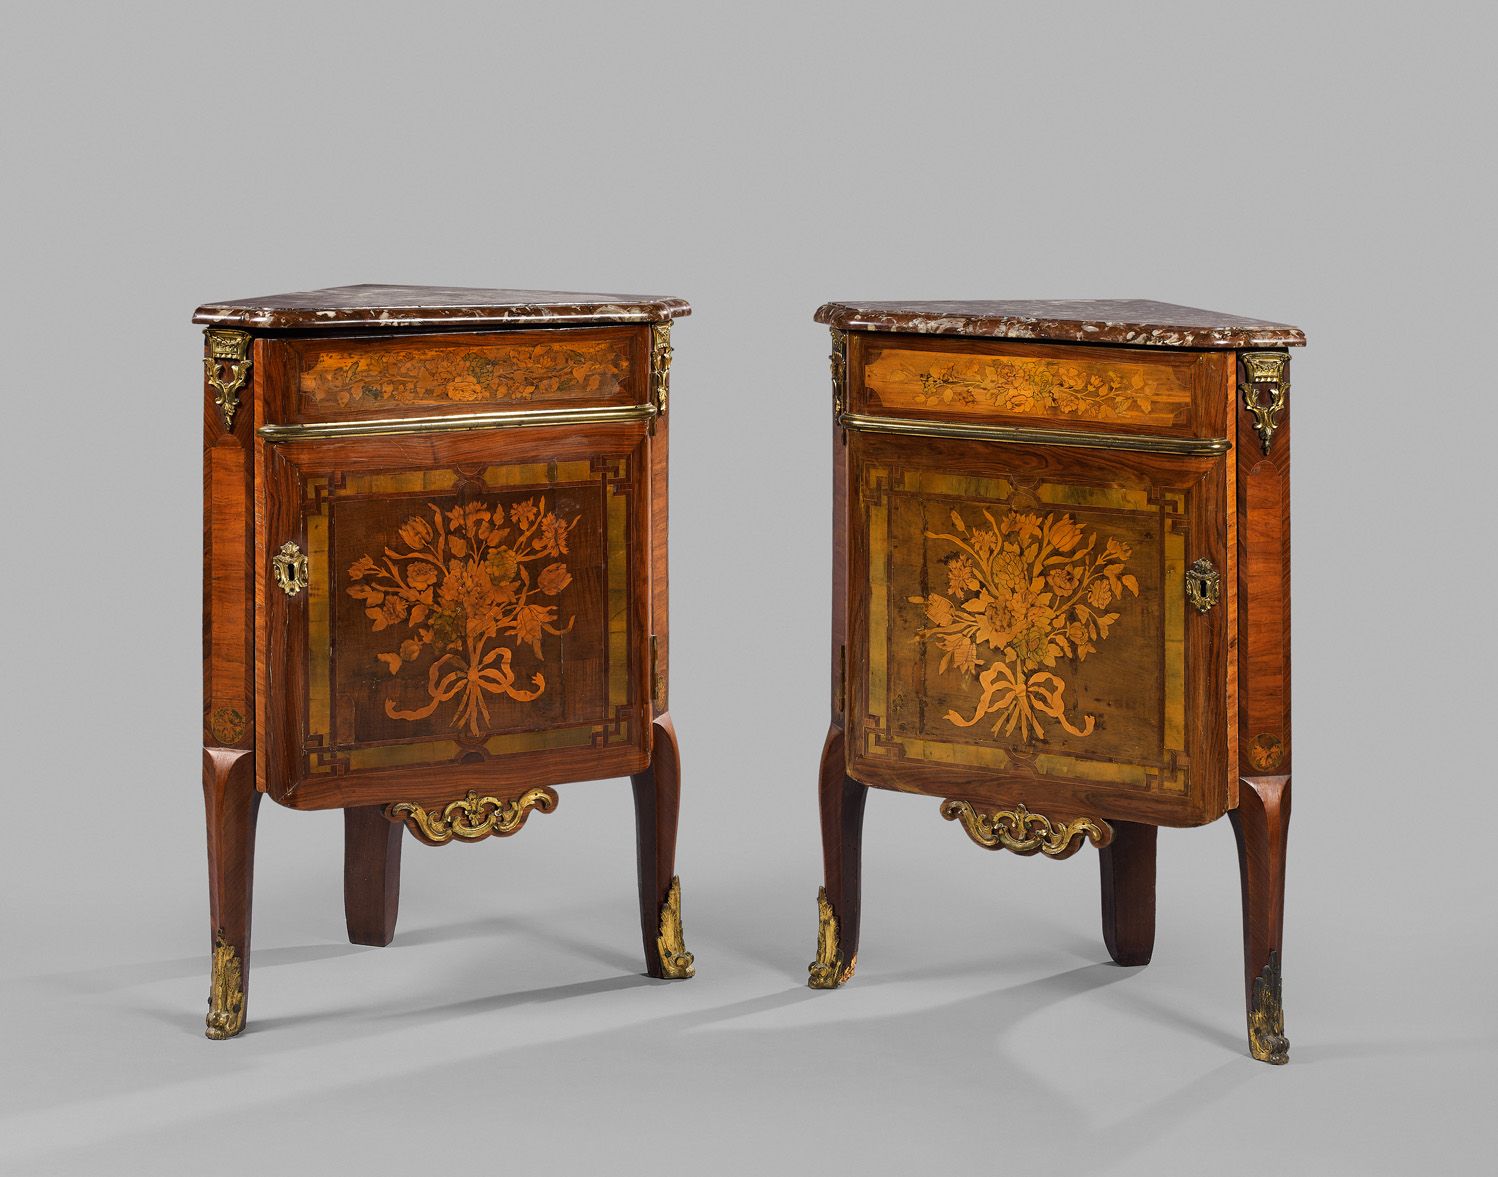 Jean Charles SAUNIER Pair of corner cabinets in rosewood and violet wood marquet&hellip;